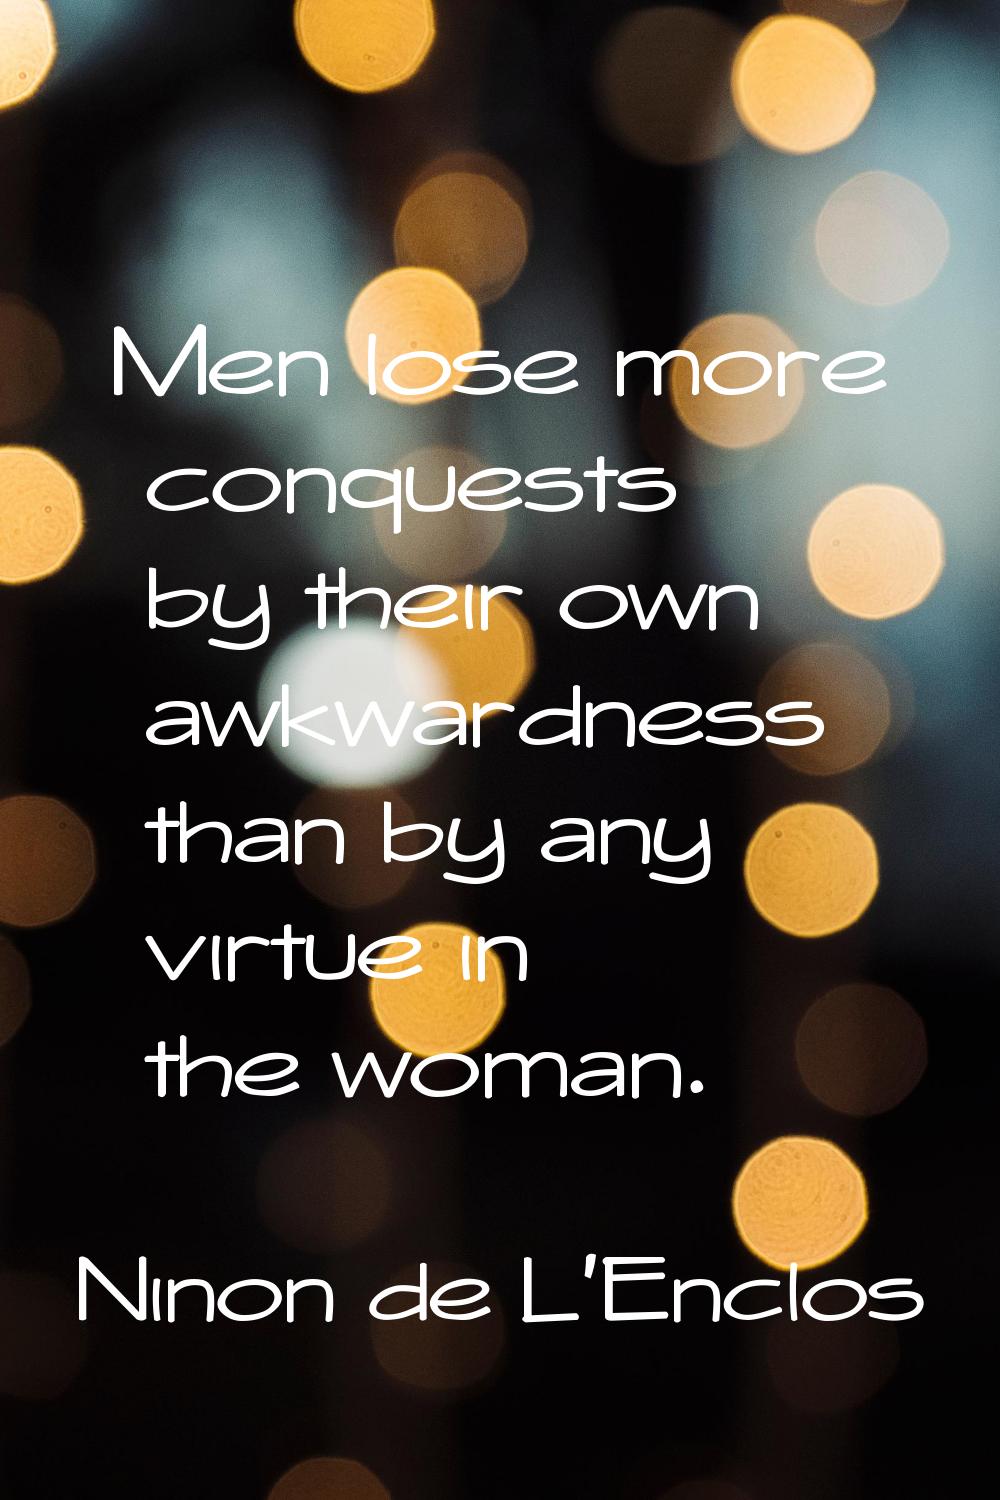 Men lose more conquests by their own awkwardness than by any virtue in the woman.